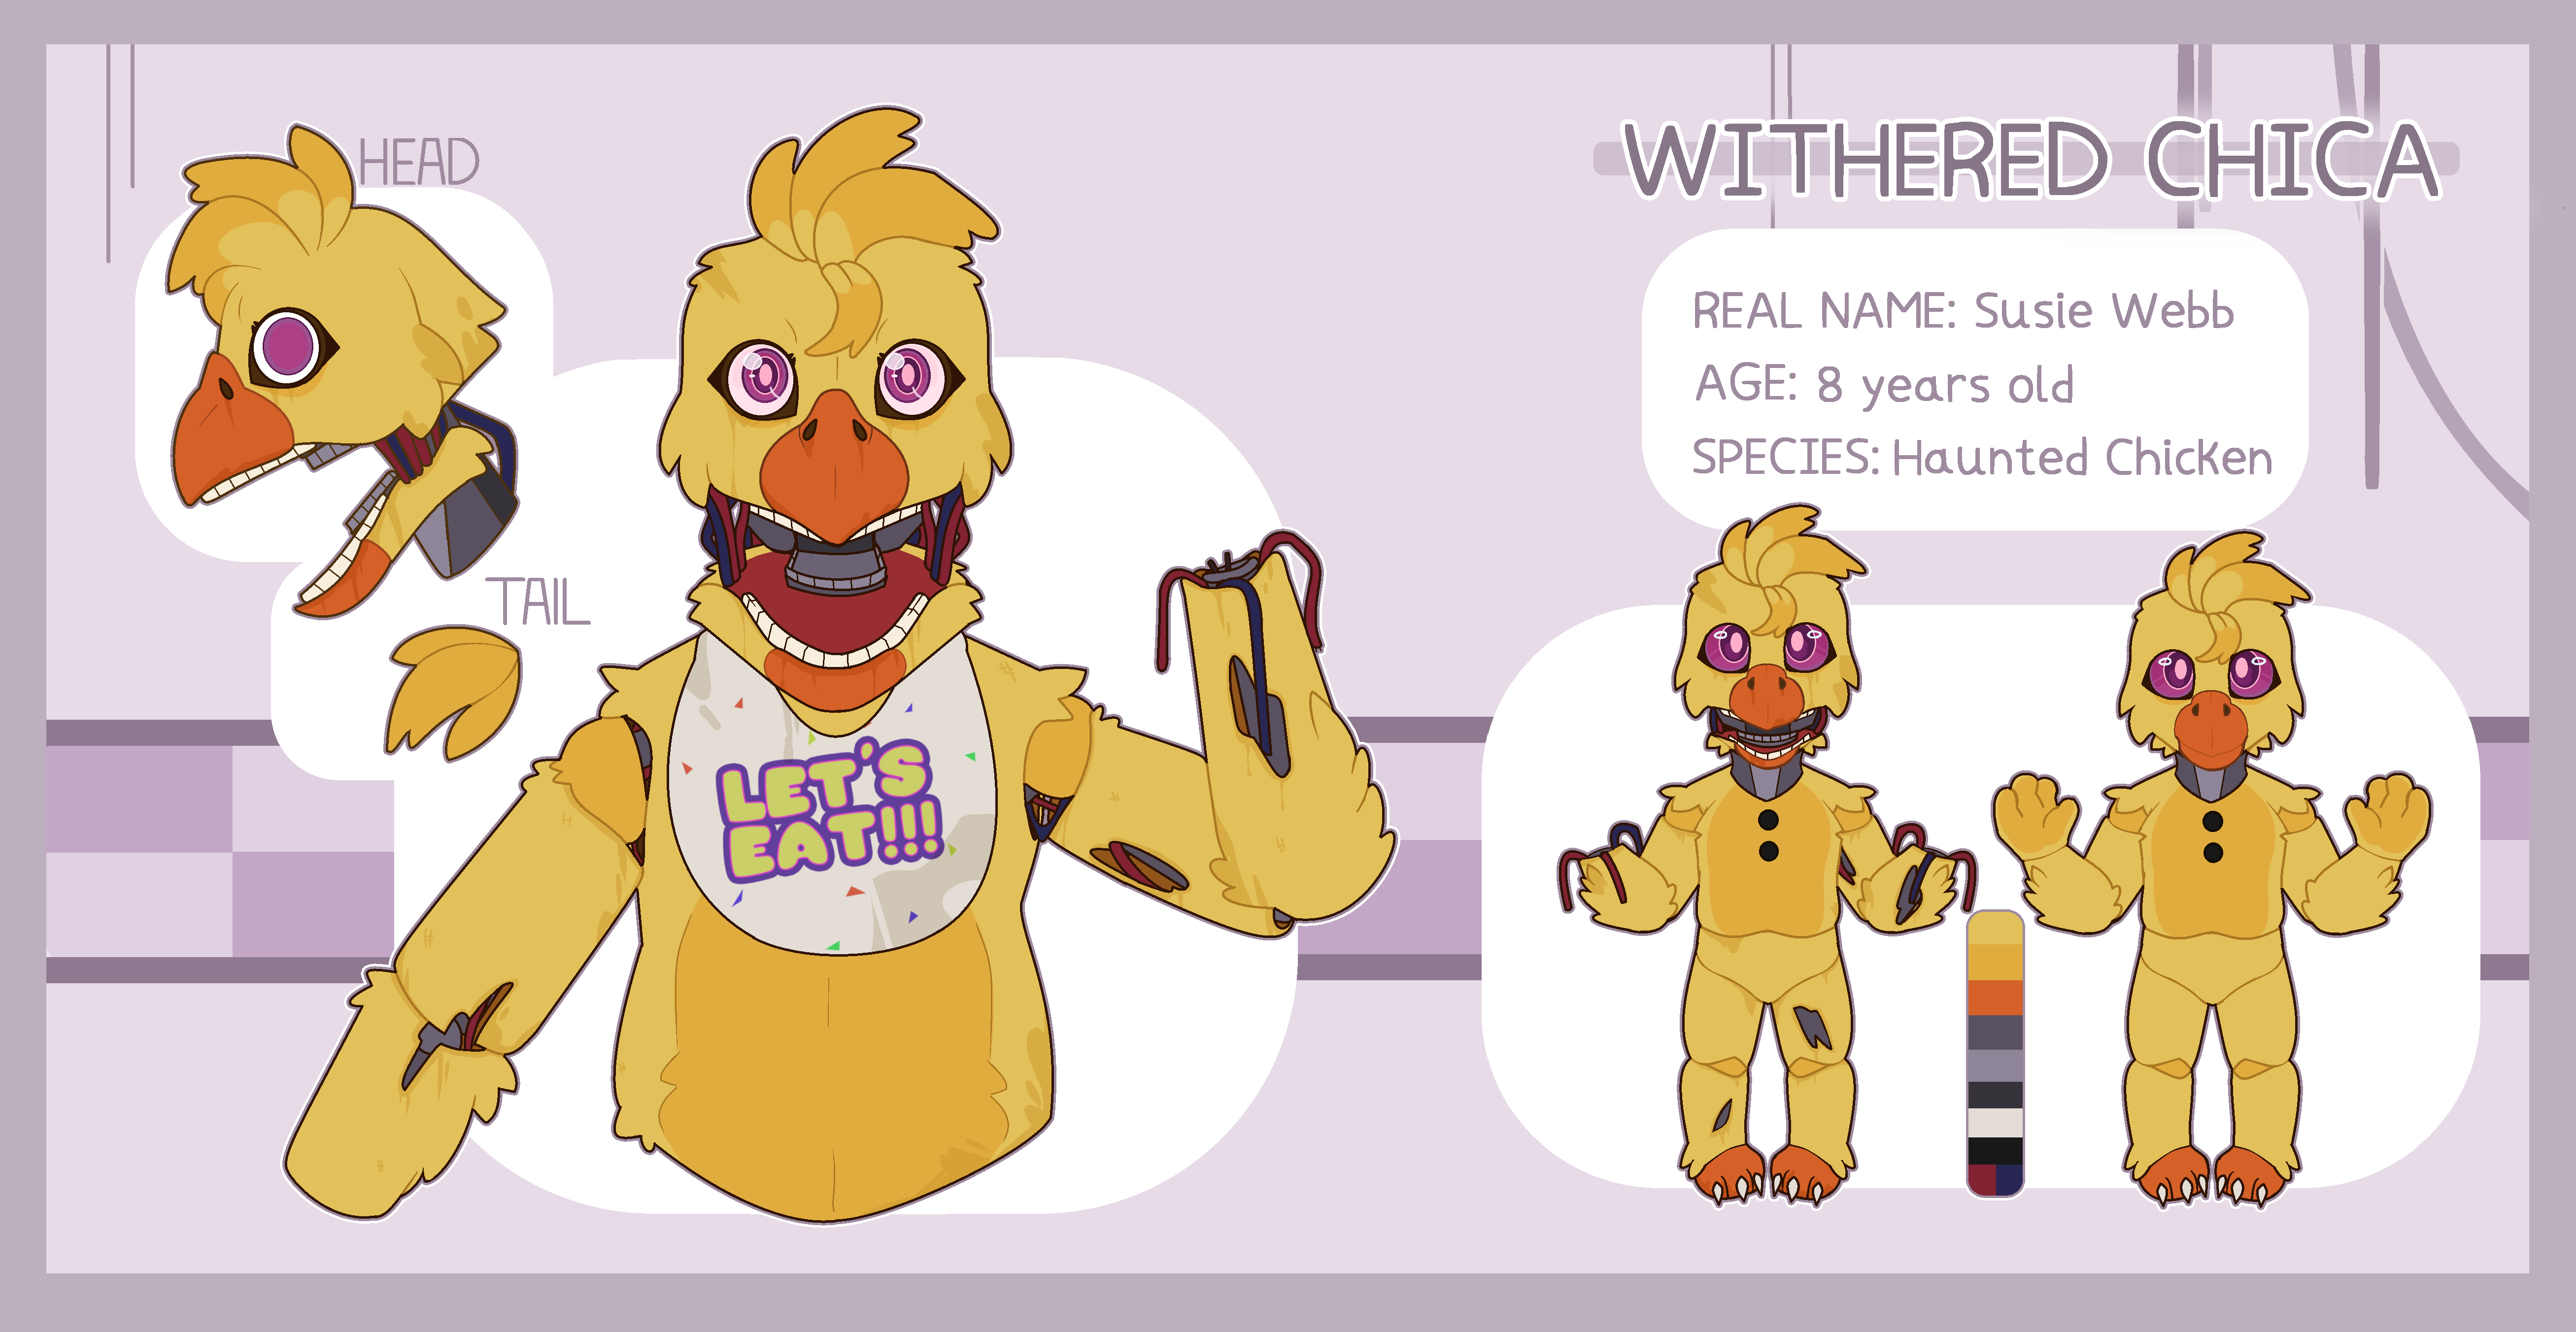 Withered chica fanart by me : r/fivenightsatfreddys